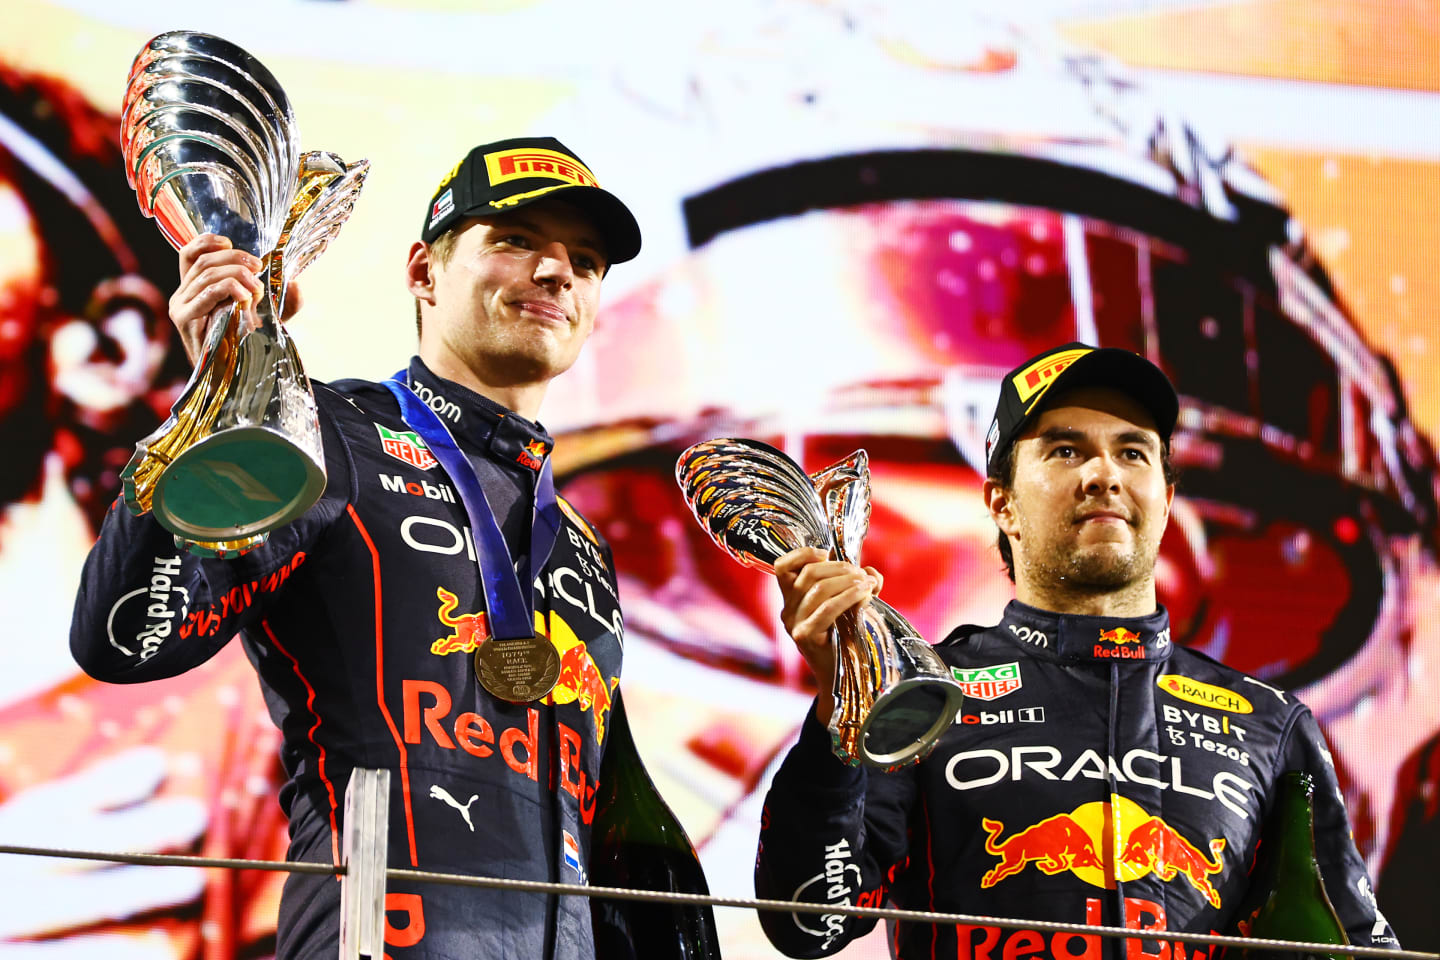 ABU DHABI, UNITED ARAB EMIRATES - NOVEMBER 20: Race Winner Max Verstappen of the Netherlands and Oracle Red Bull Racing and Third placed Sergio Perez of Mexico and Oracle Red Bull Racing celebrate on the podium during the F1 Grand Prix of Abu Dhabi at Yas Marina Circuit on November 20, 2022 in Abu Dhabi, United Arab Emirates. (Photo by Mark Thompson/Getty Images)